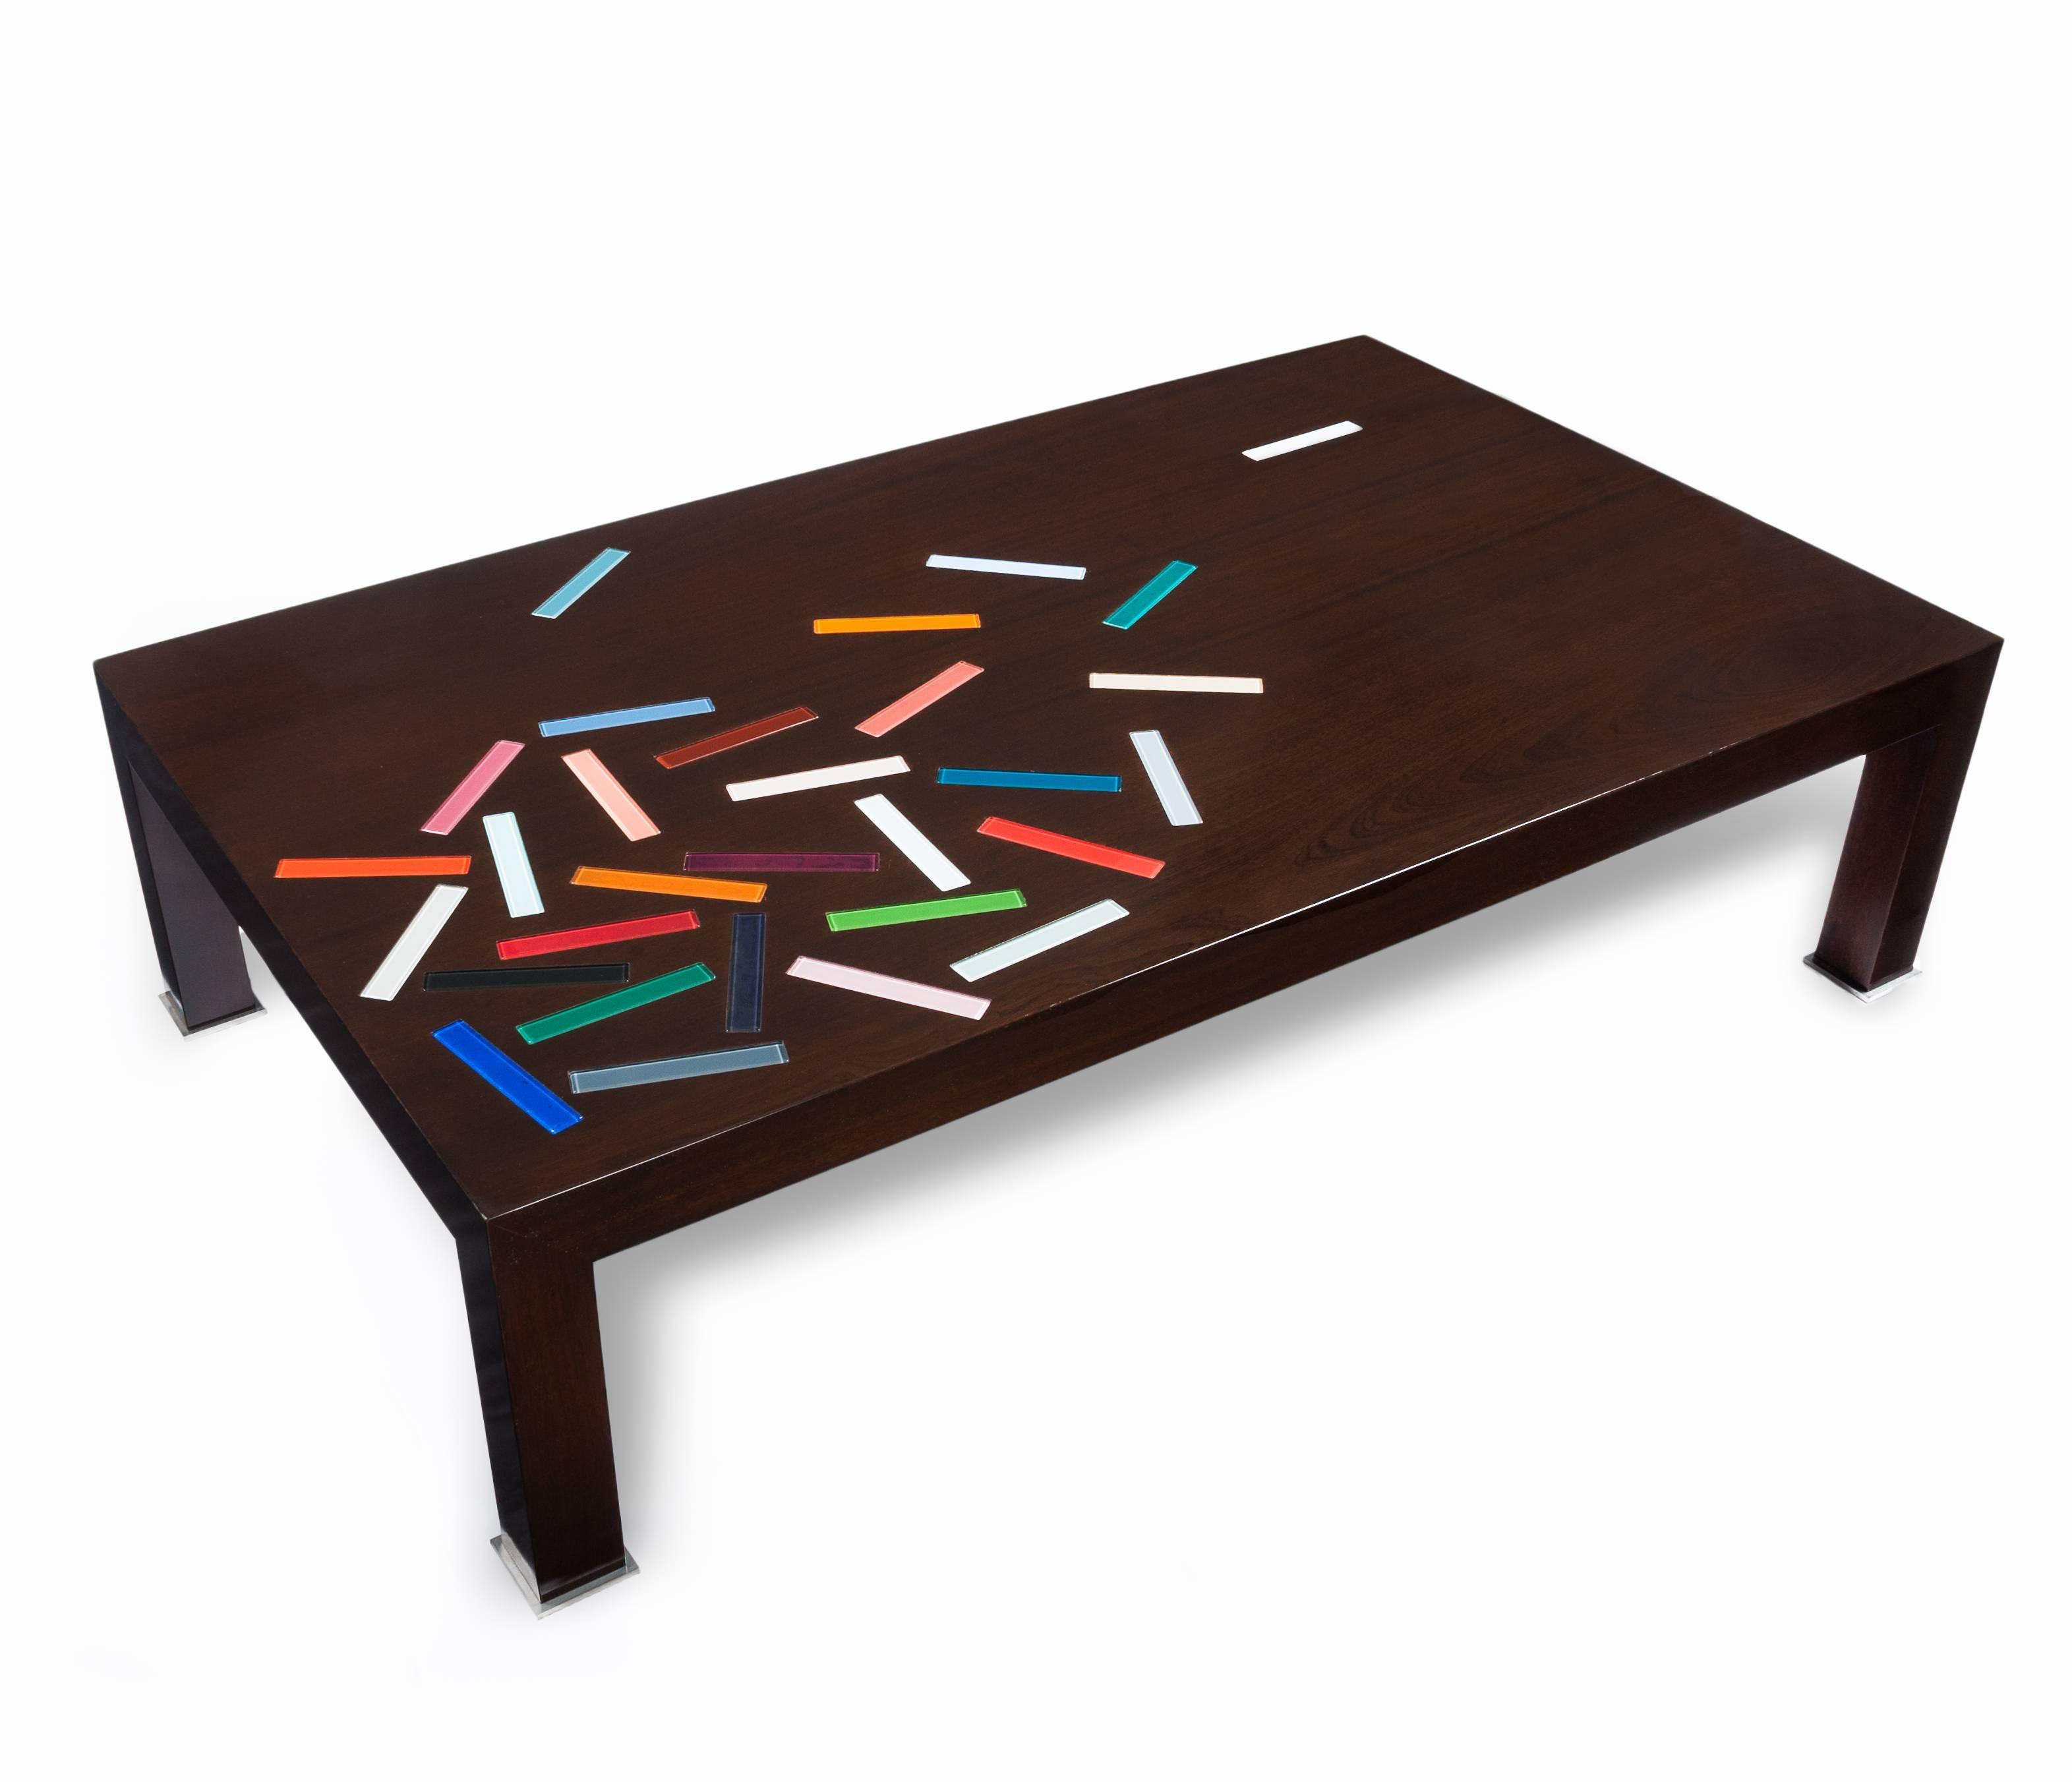 A one-of-a-kind sapele mahogany coffee table with various colored-glass pieces inlaid in the surface. Created by A. M. Krieger in 2014.